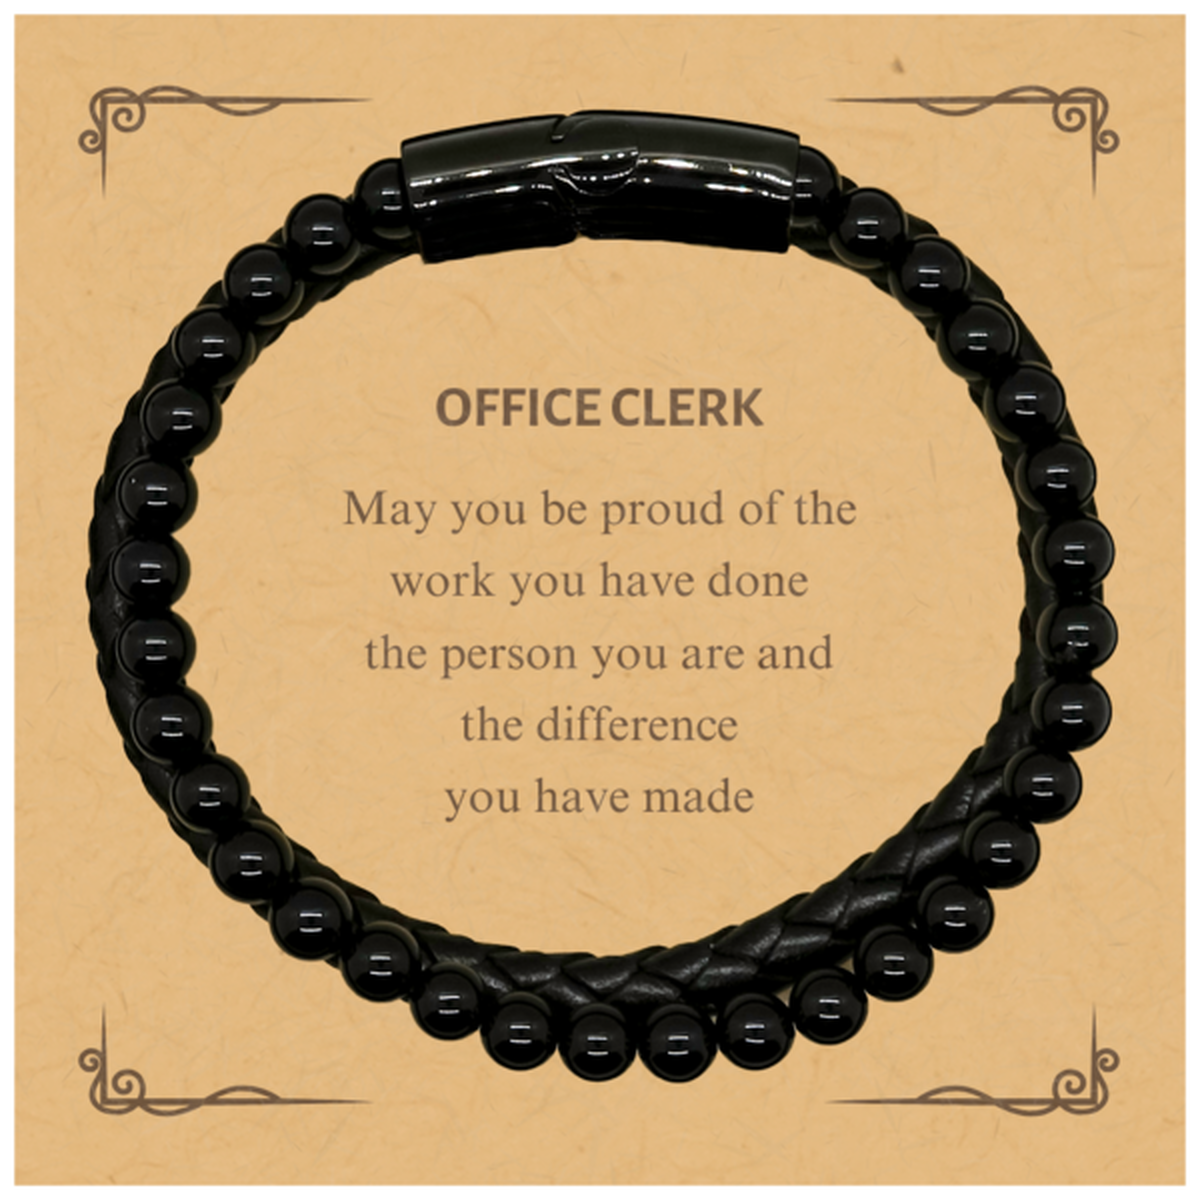 Office Clerk May you be proud of the work you have done, Retirement Office Clerk Stone Leather Bracelets for Colleague Appreciation Gifts Amazing for Office Clerk